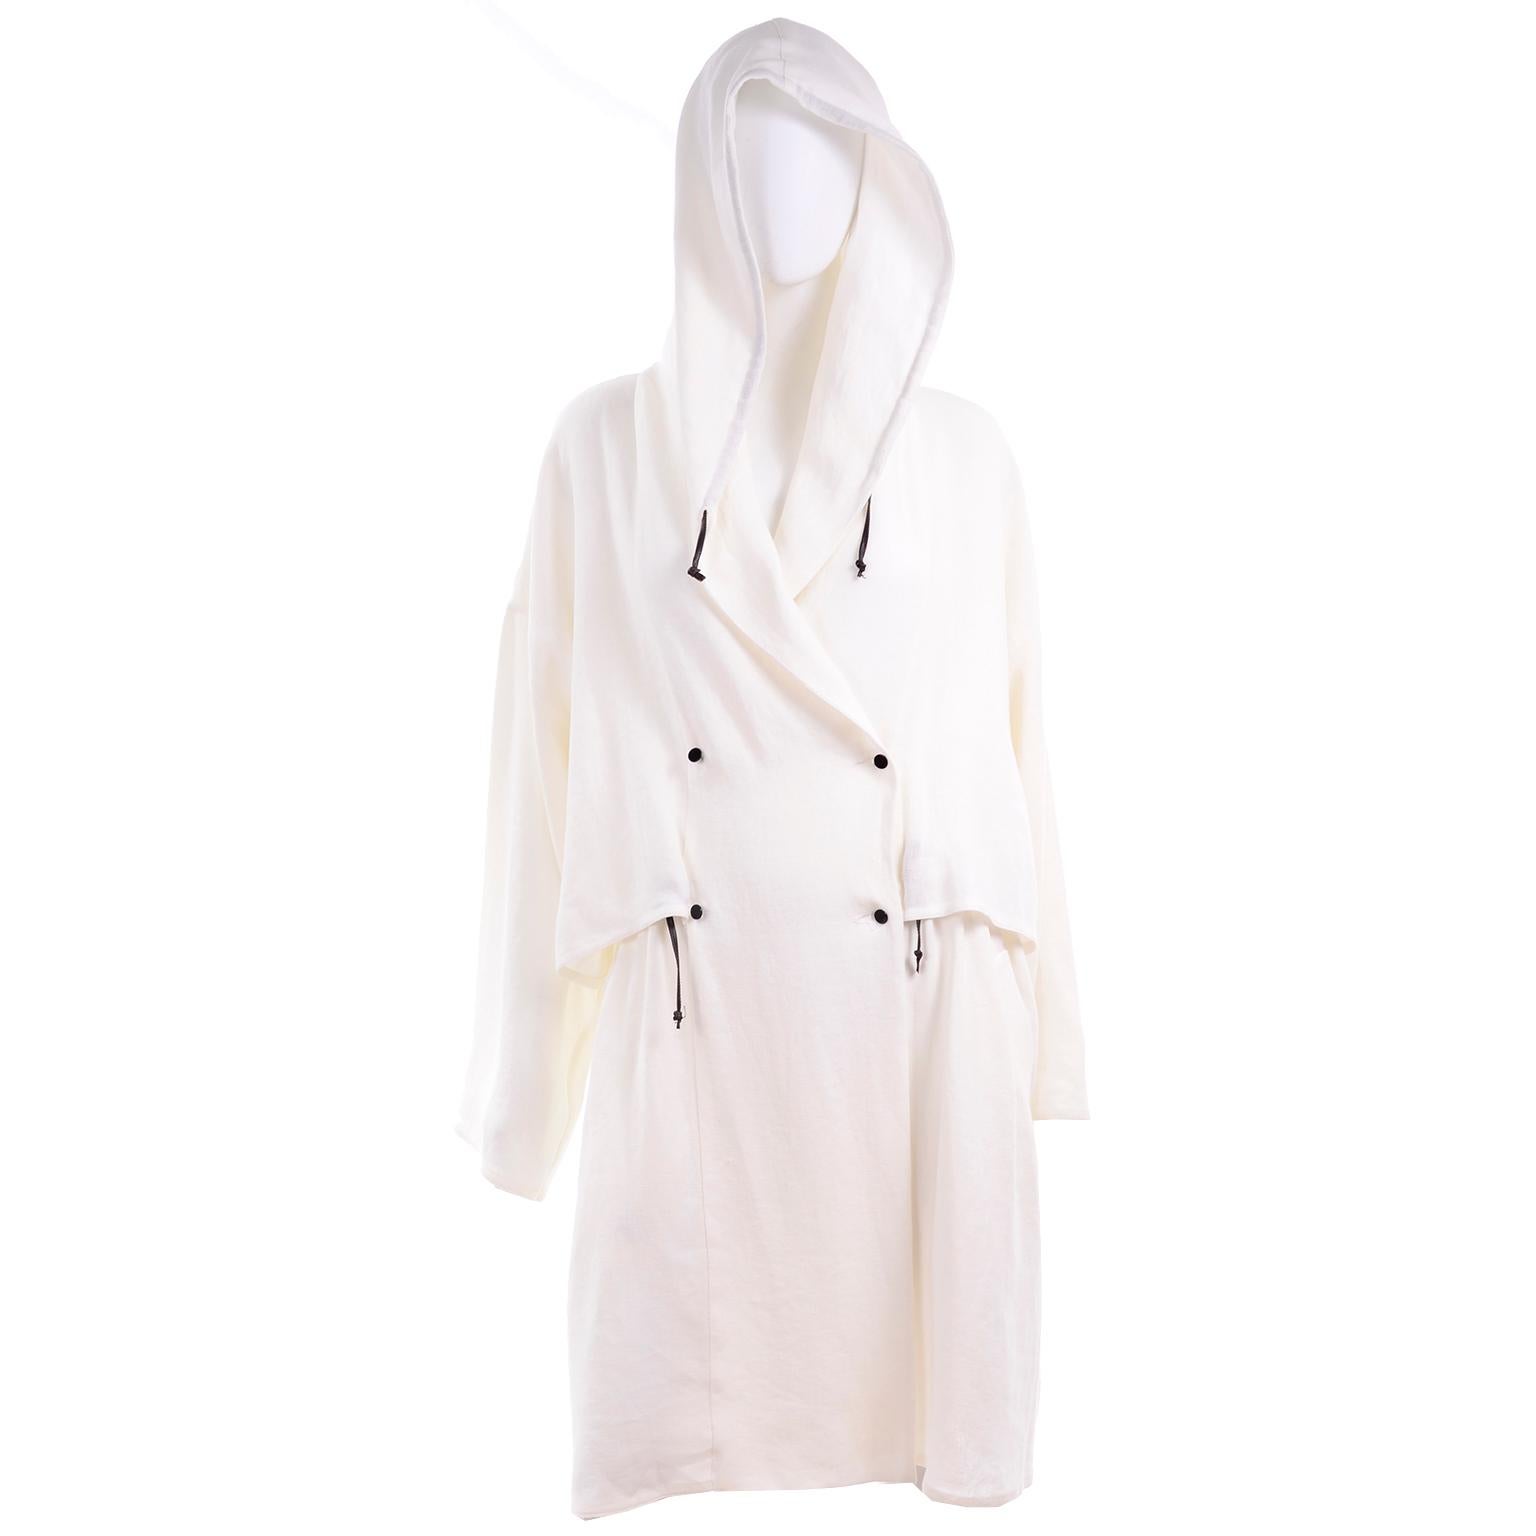 Deadstock New White Linen Dusan Coat Drawstring Jacket with Hood New With Tags 2